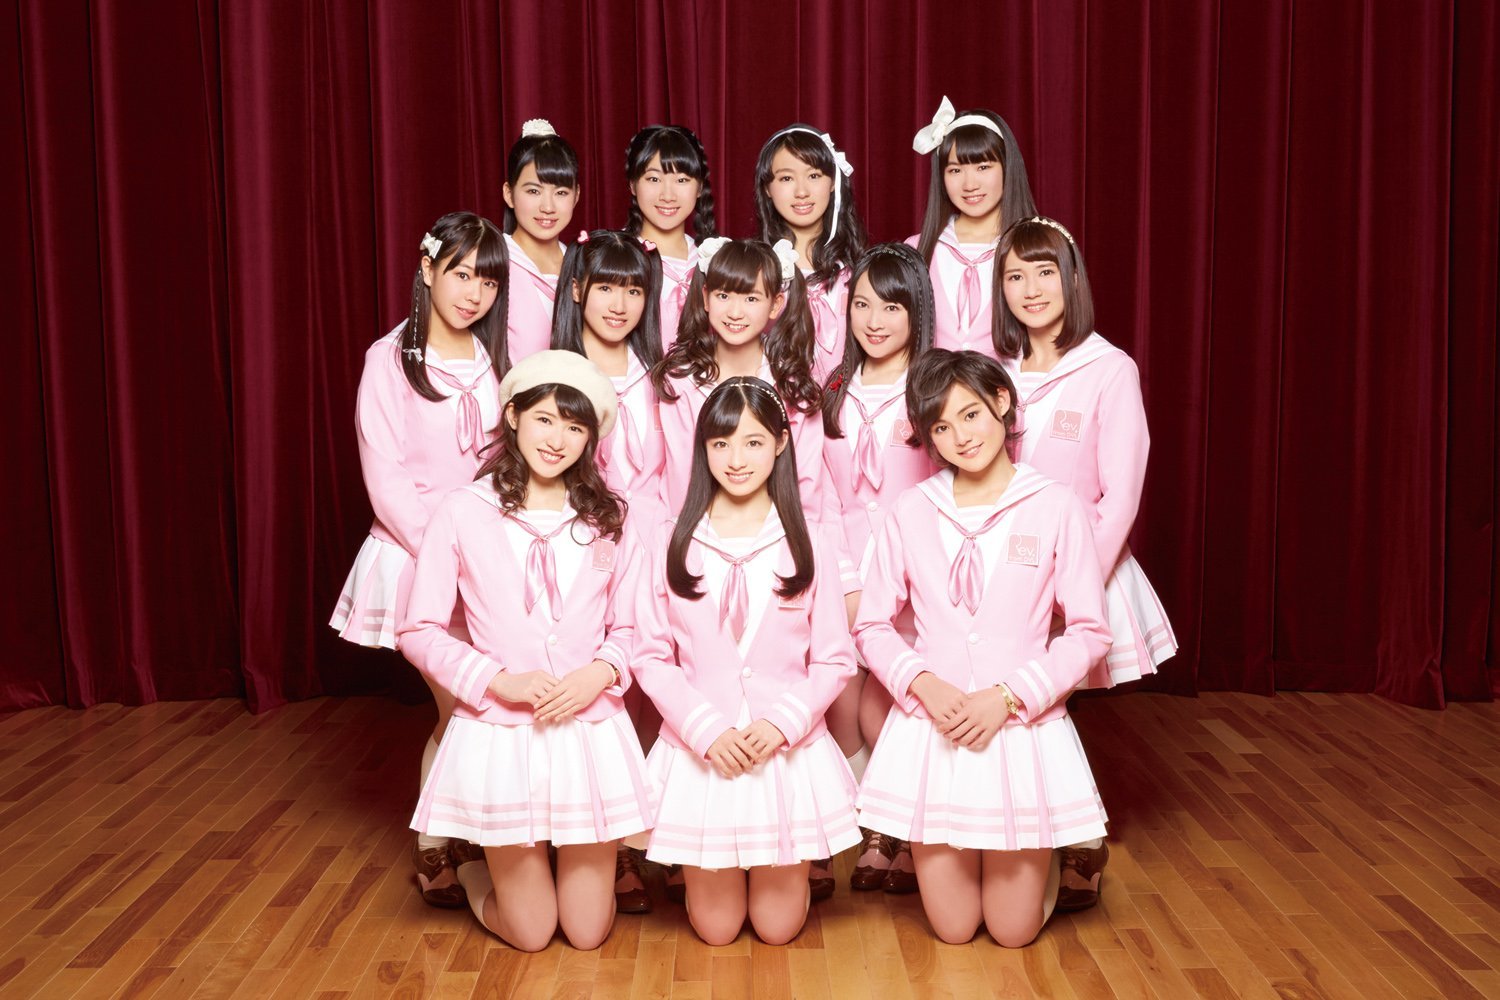 Rev.from DVL Document Their Road to the Big Stage in the MV for “Kimi ga Ite, Boku ga Ita”!